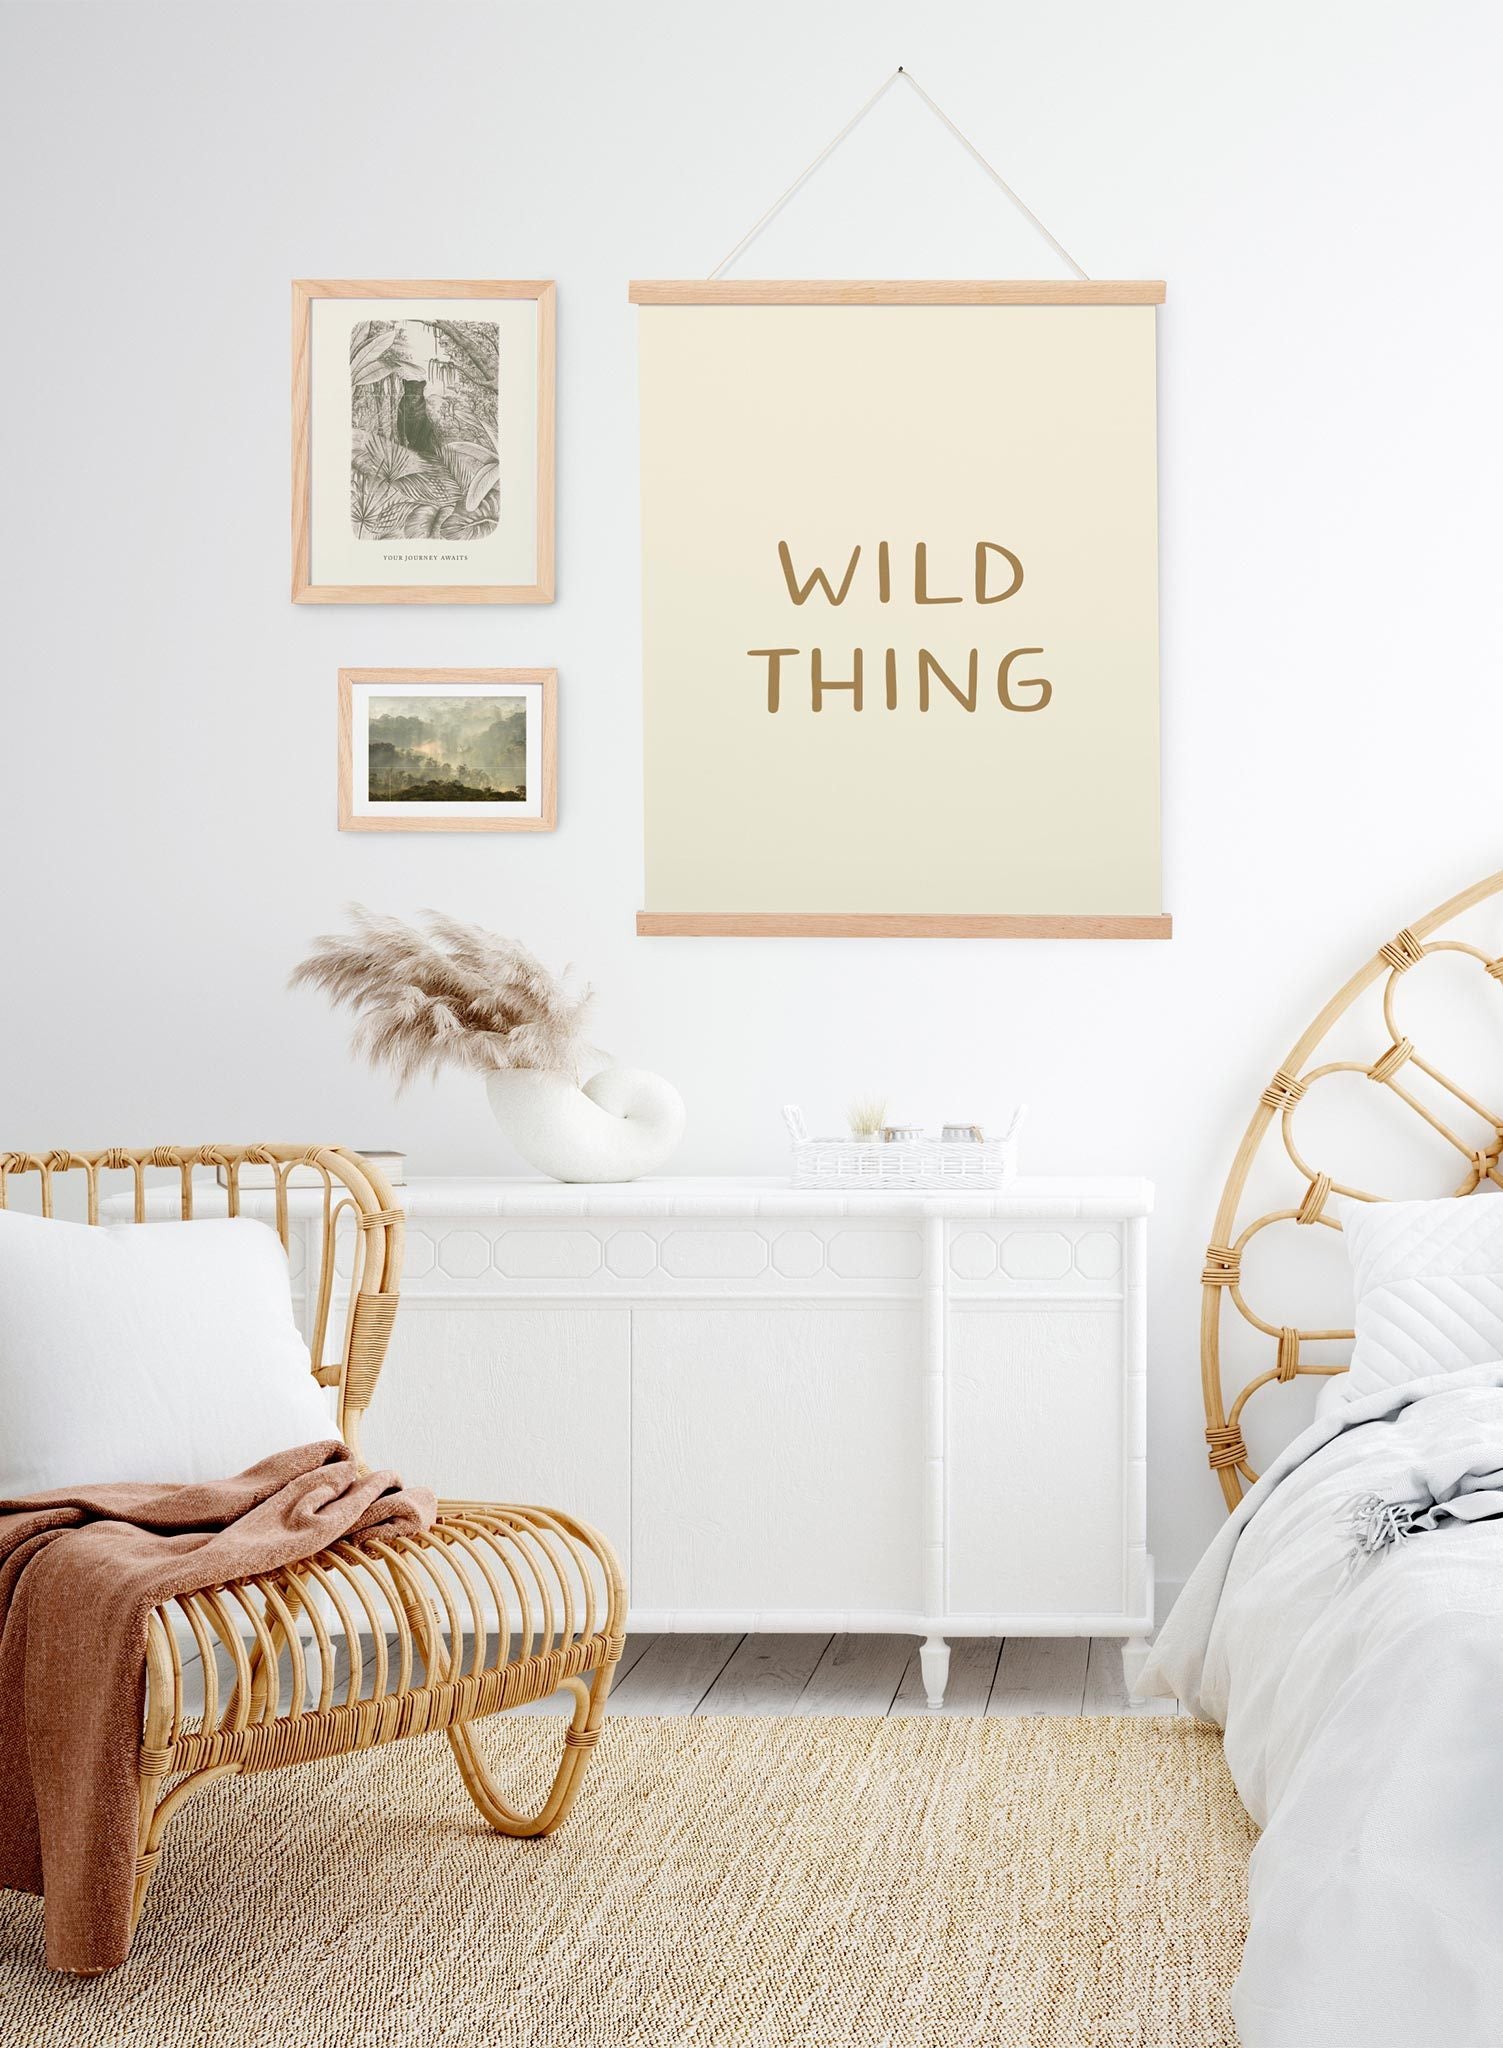 Wilding Out is a minimalist typography of the words "Wild Thing" written with a round handwriting by Opposite Wall.